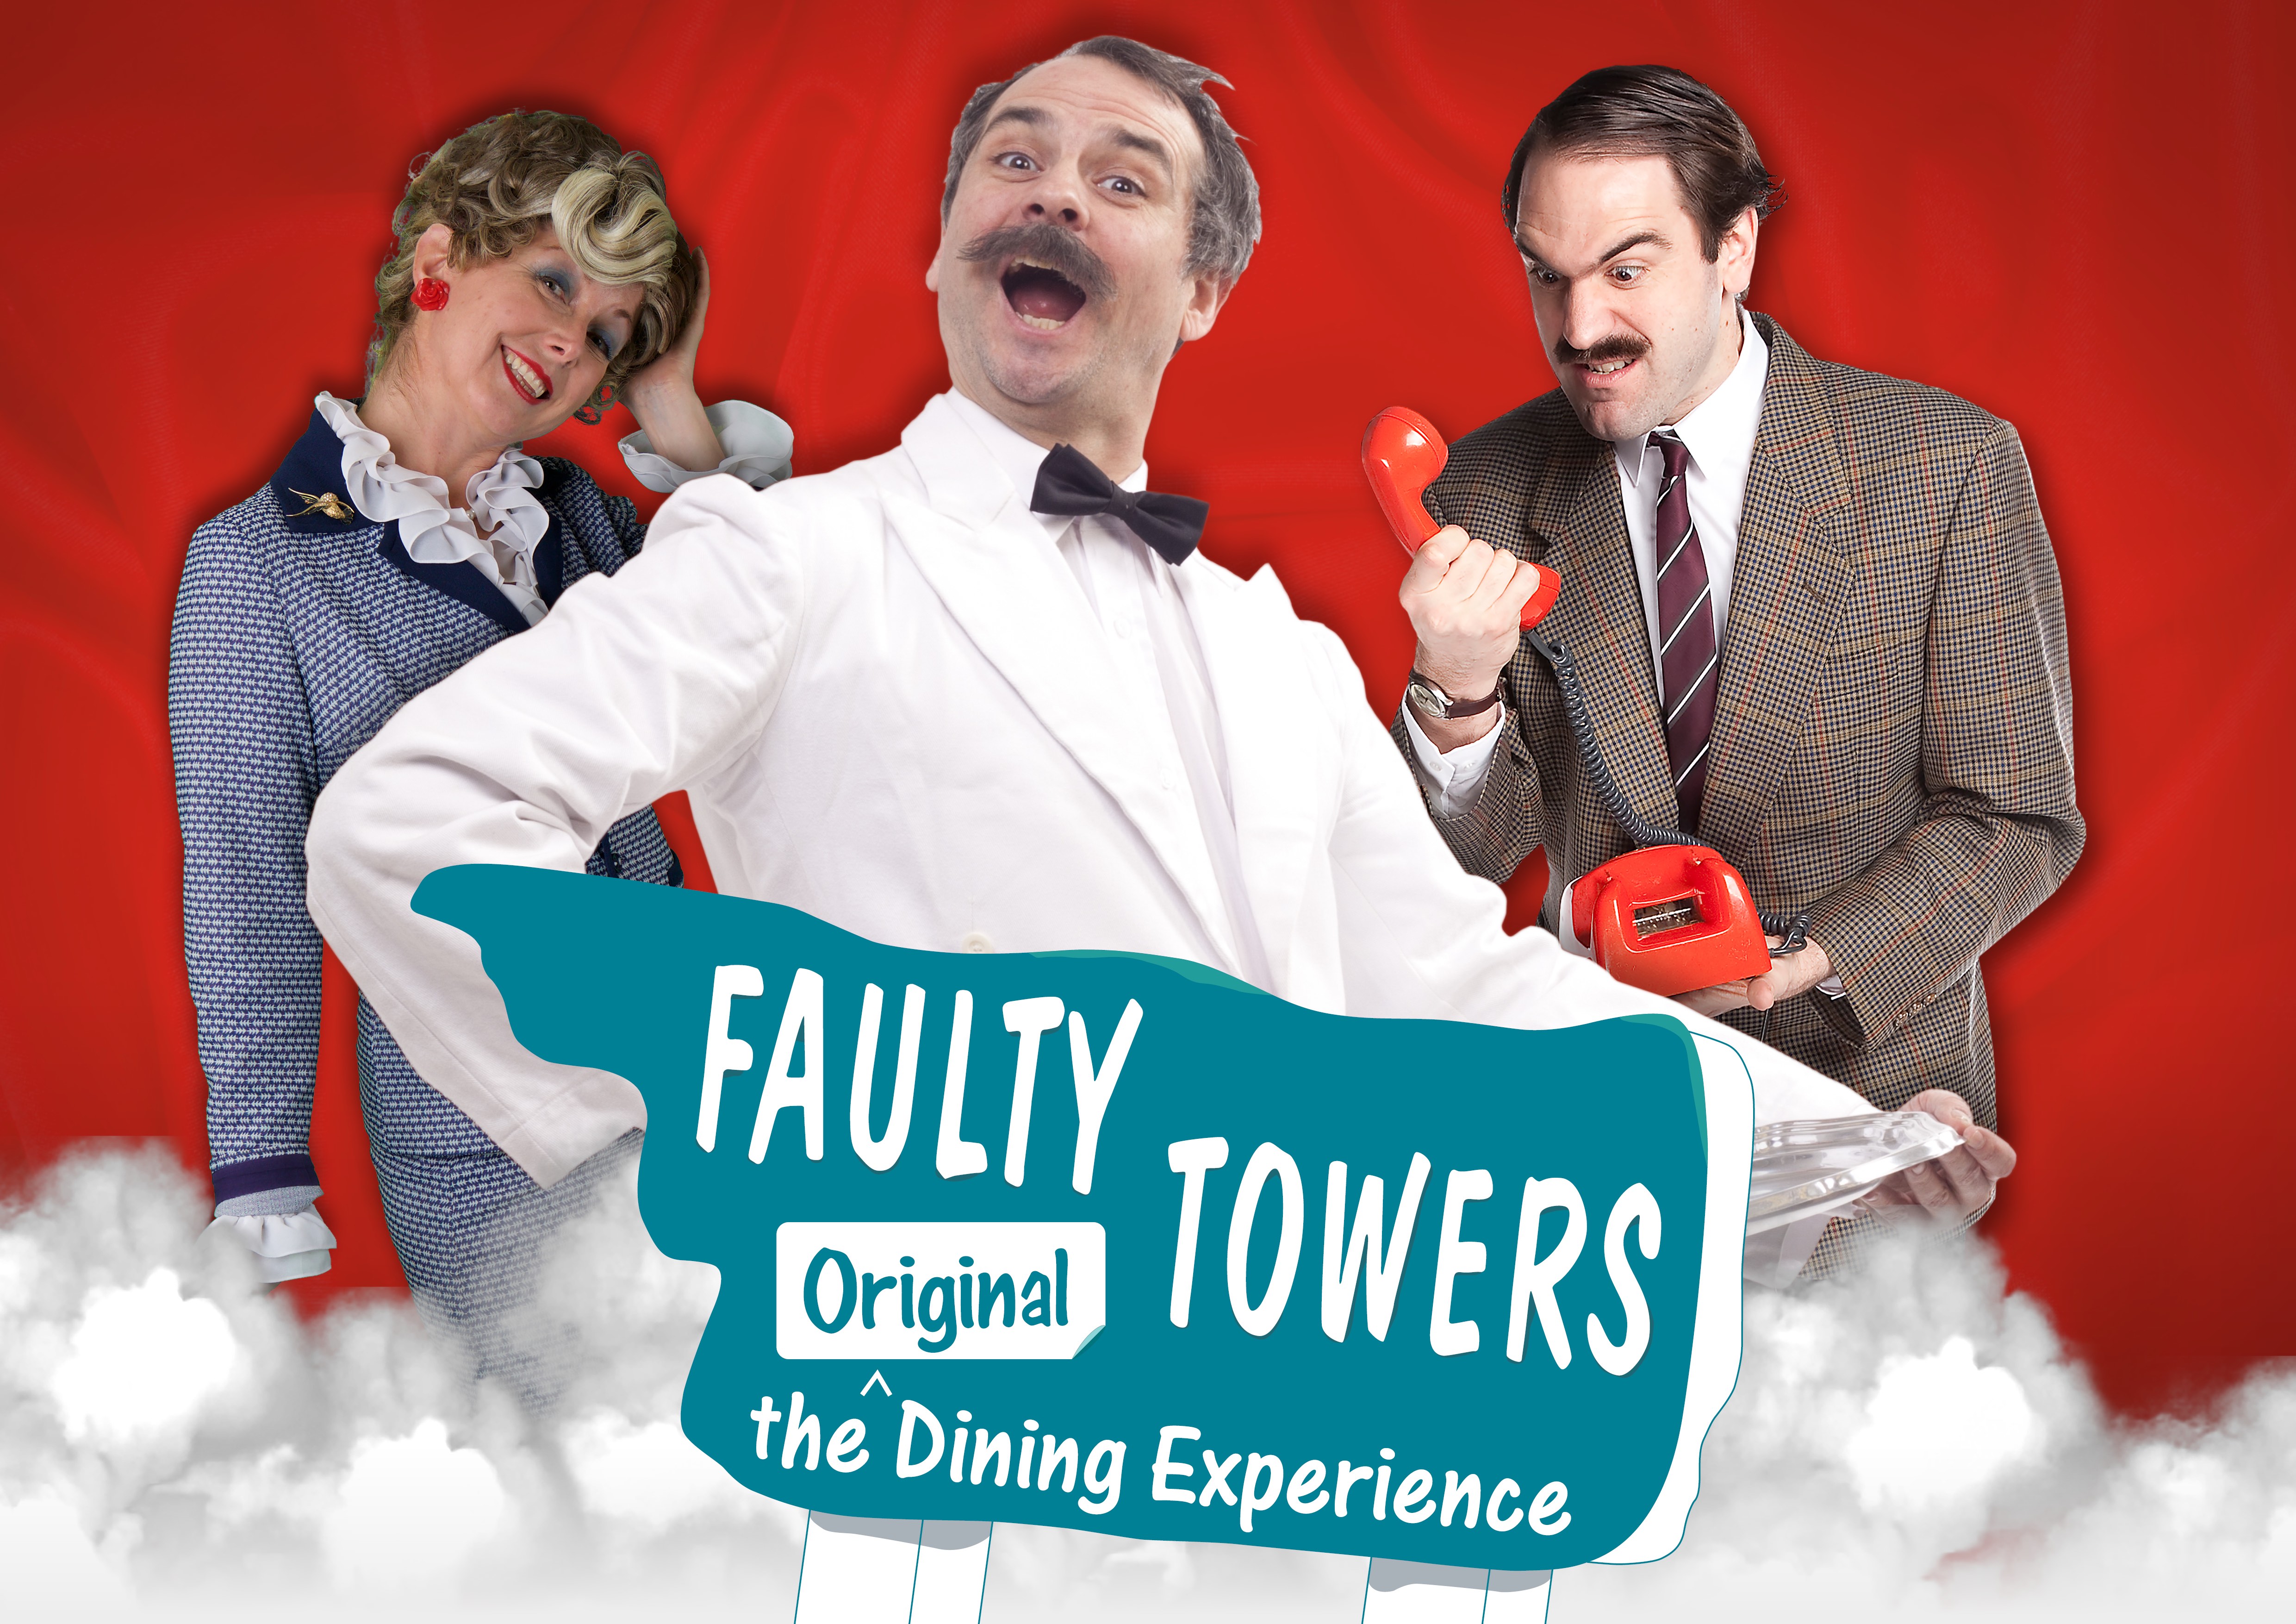 Faulty Towers the dining experience is coming to Bournemouth Pier